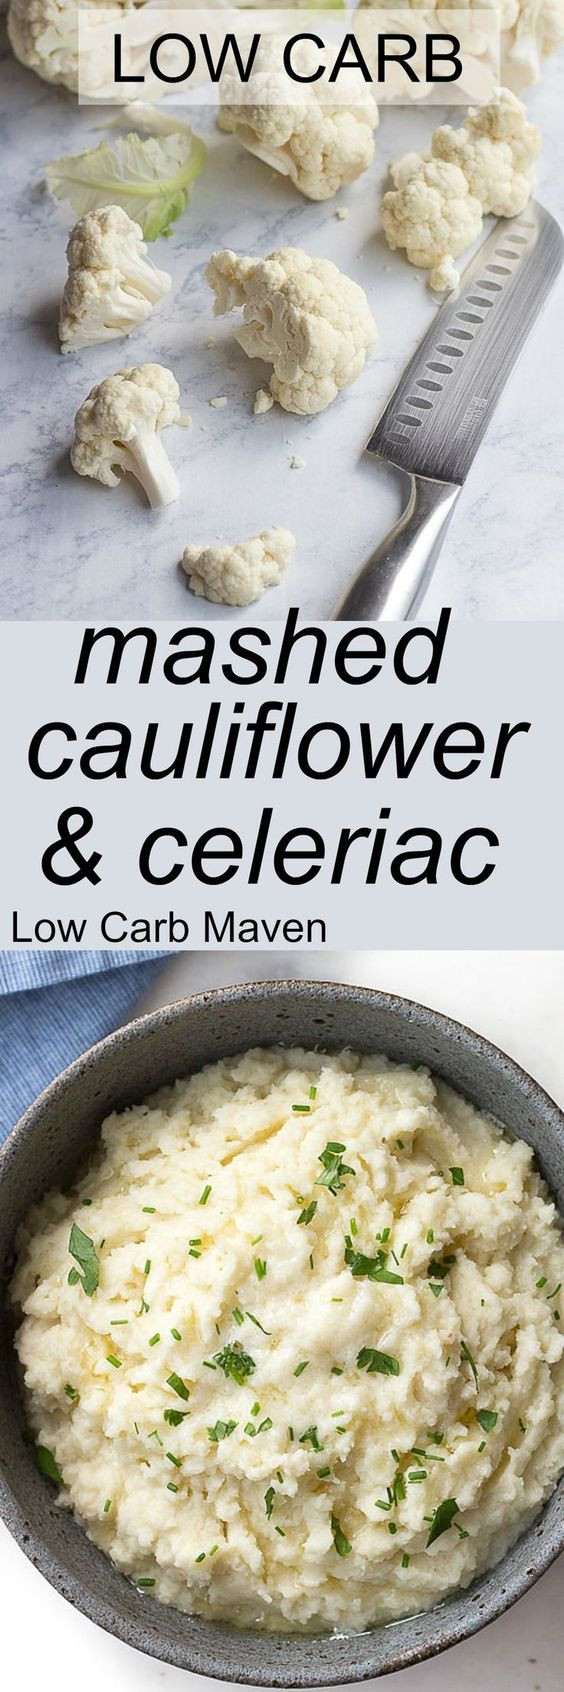 Low Carb Mashed Potatoes
 Mashed Cauliflower with Celery Root